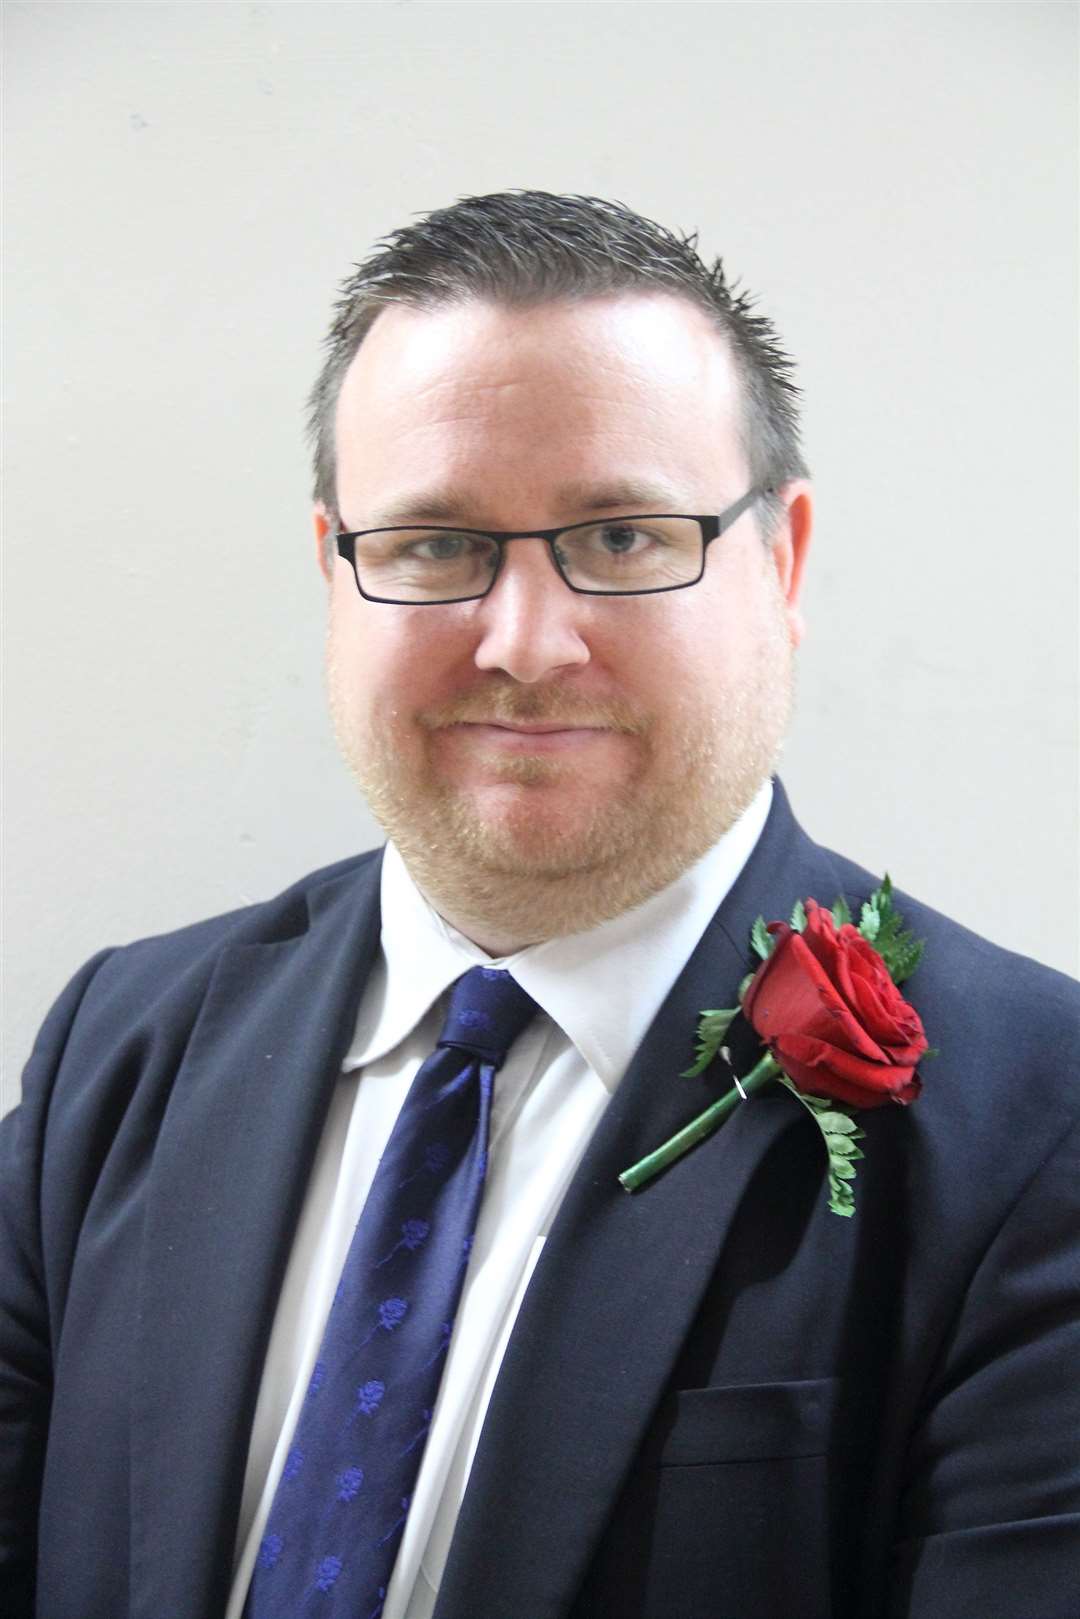 Coldharbour Cllr Shane Mochrie-Cox expressed concerns at the proposals. Picture: Gravesham council.